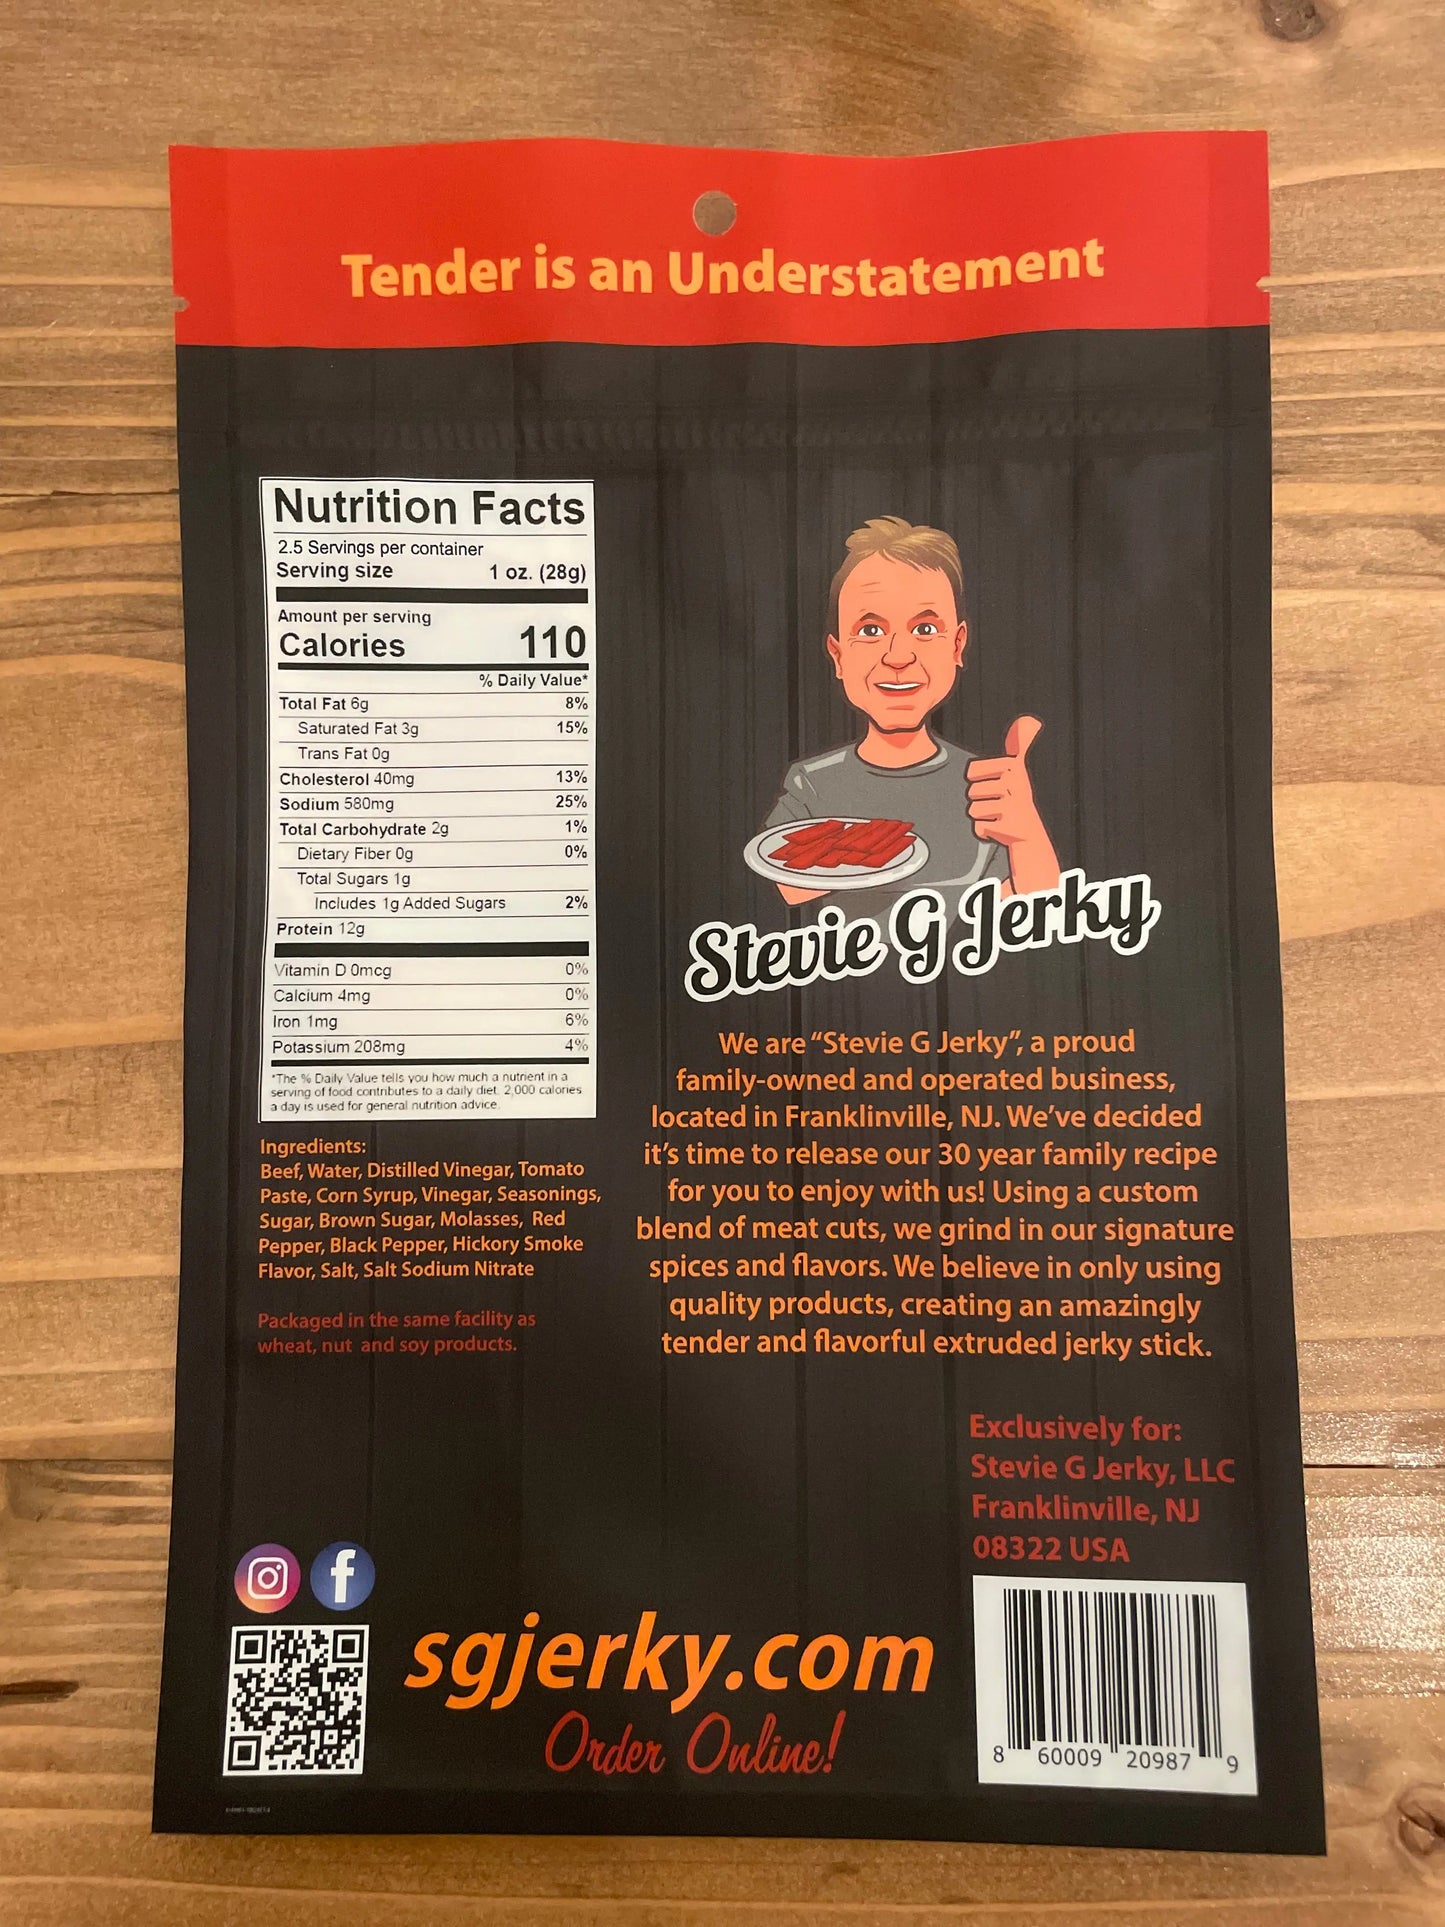 Hot Beef Jerky Flats product package nutrition facts